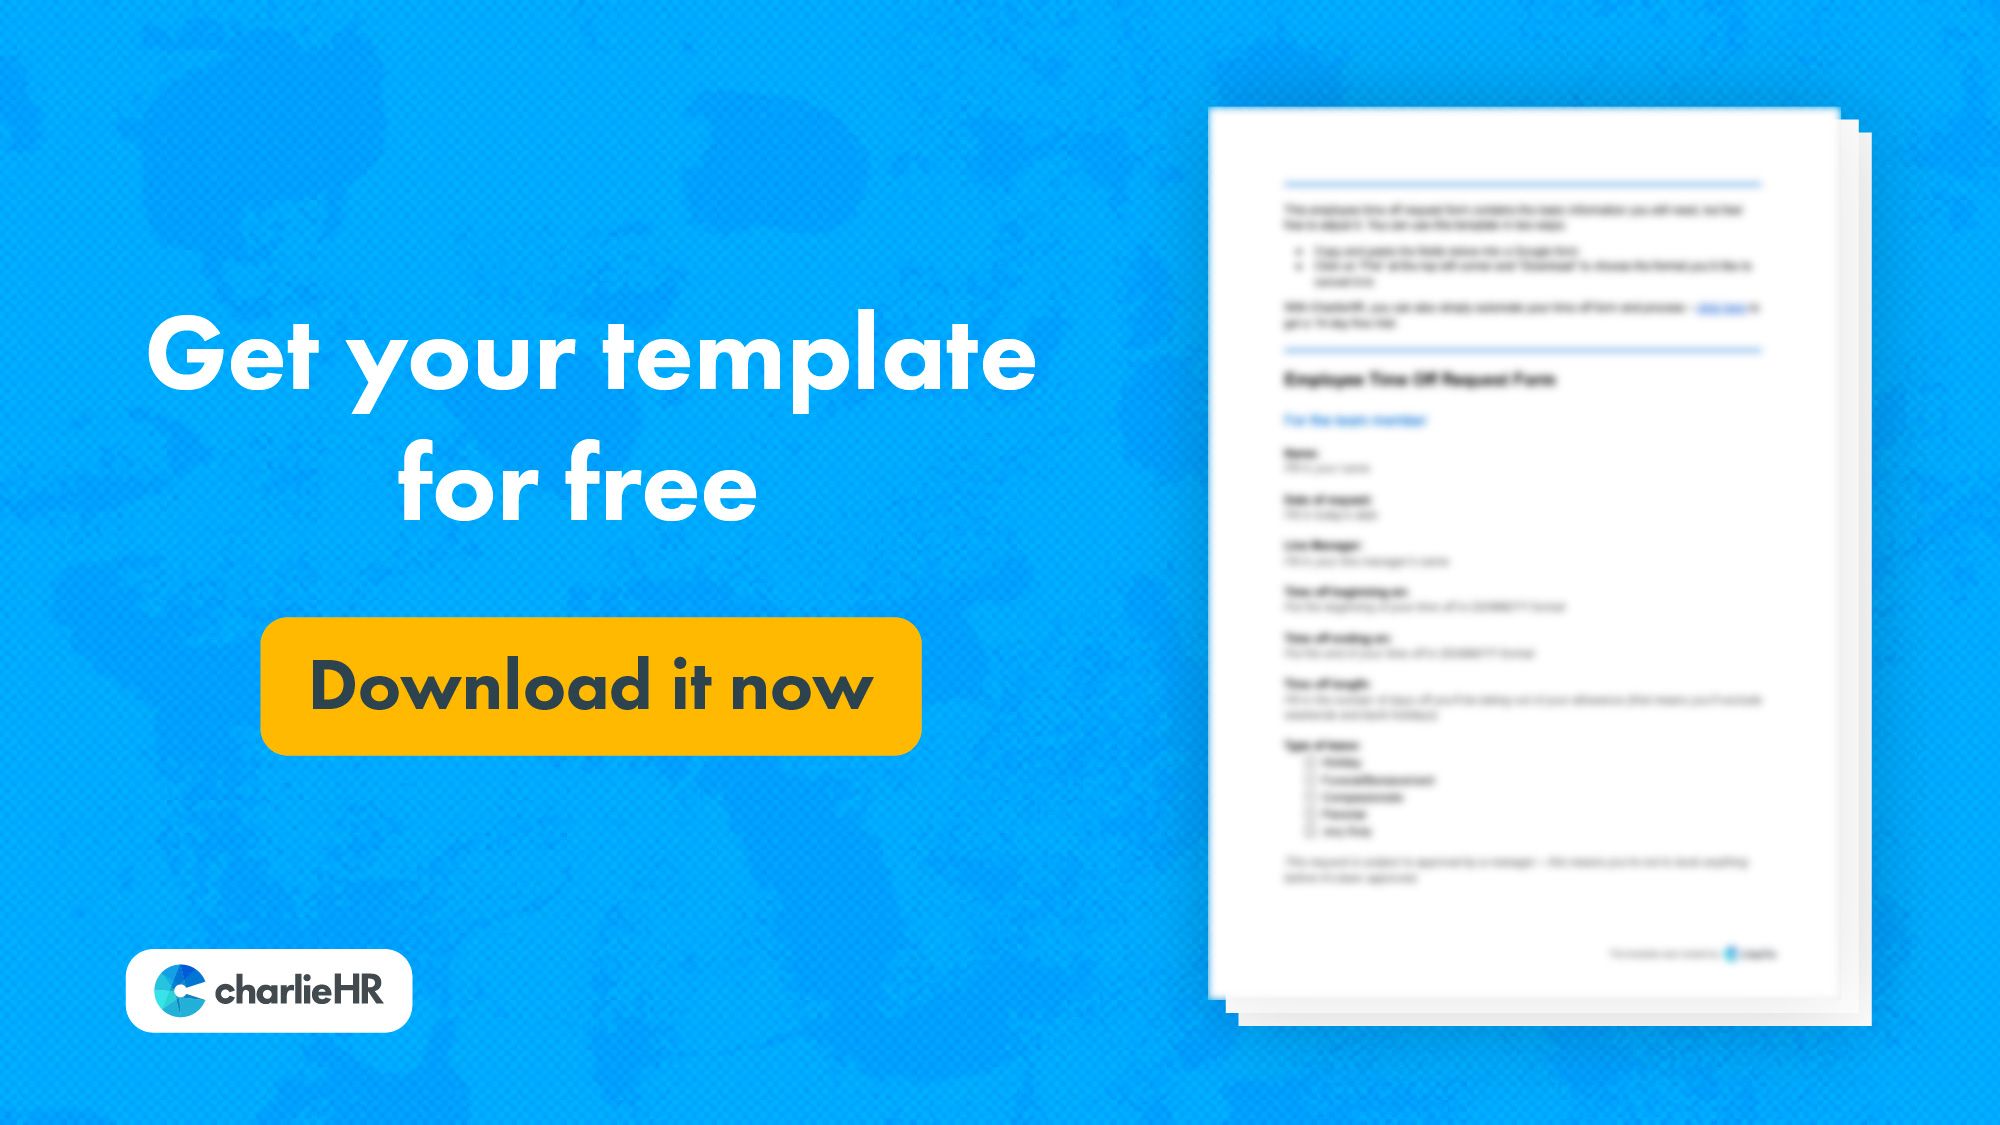 Click here to download your holiday request form template